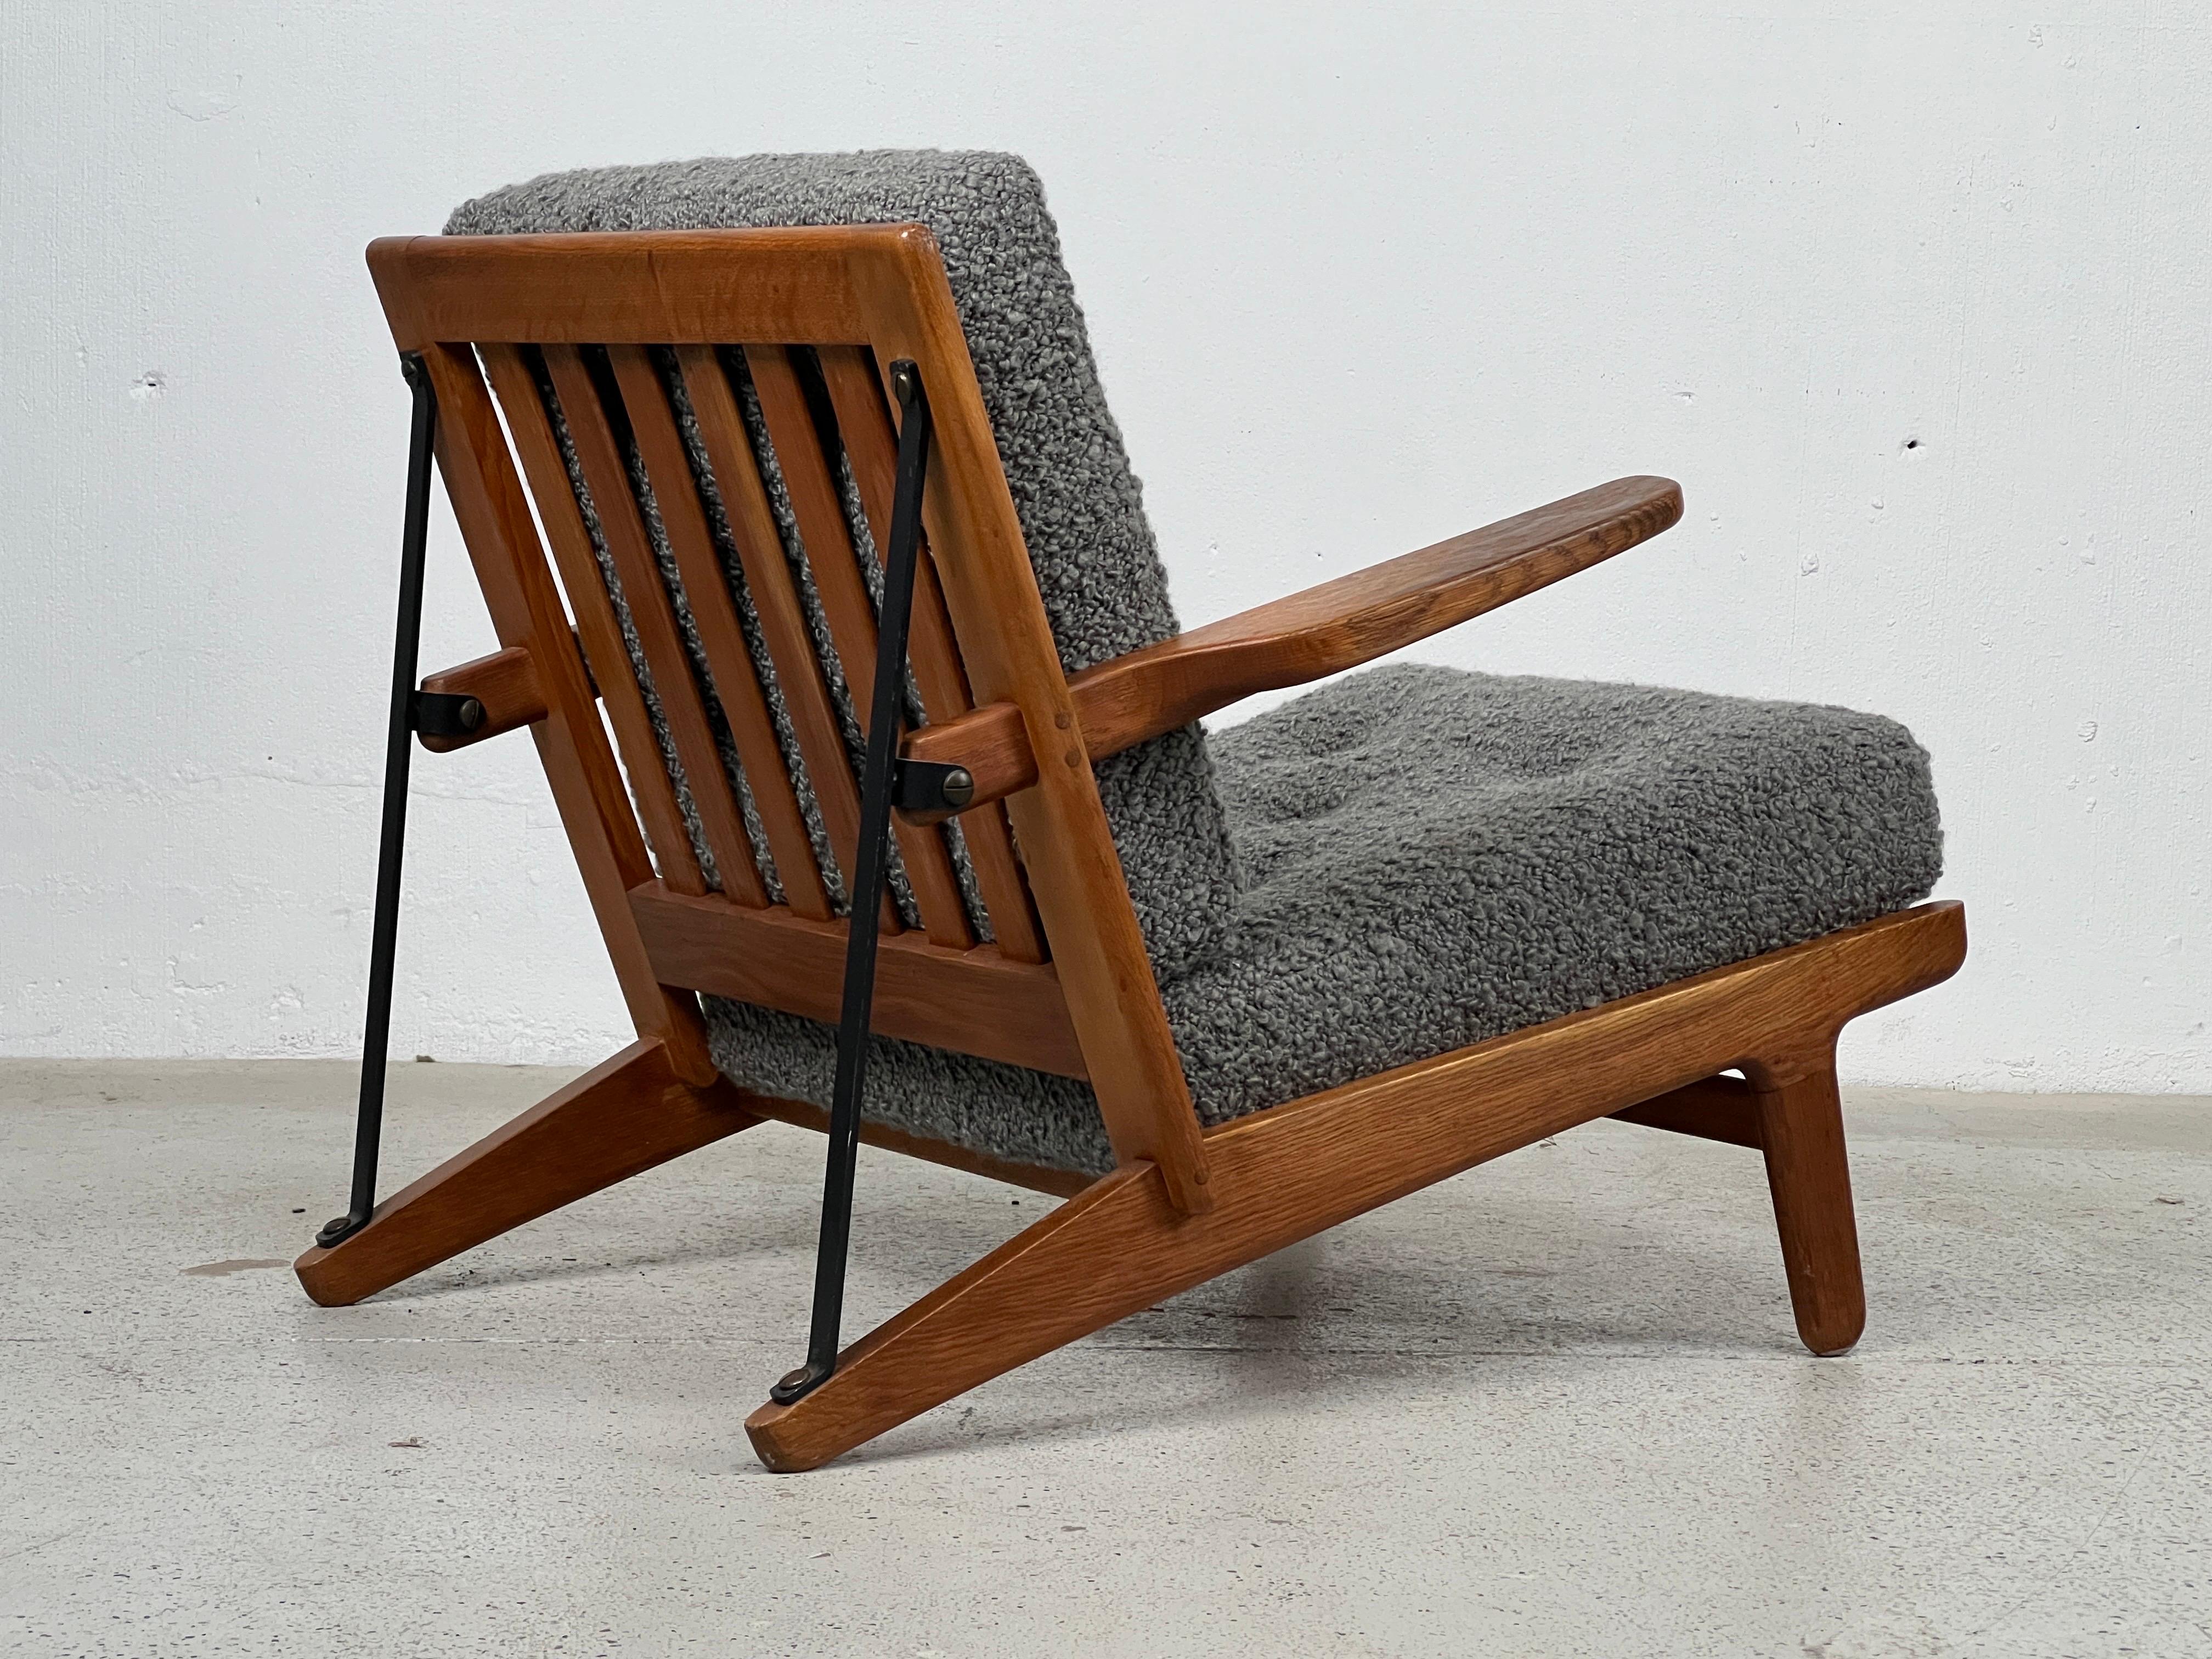 Very rare and early model 240-11 ‘easy chair’ designed by Børge Mogensen and produced by Andreas Graversen/Fredericia Furniture.  Executed in quarter sawn oak, iron, brass and upholstery.  